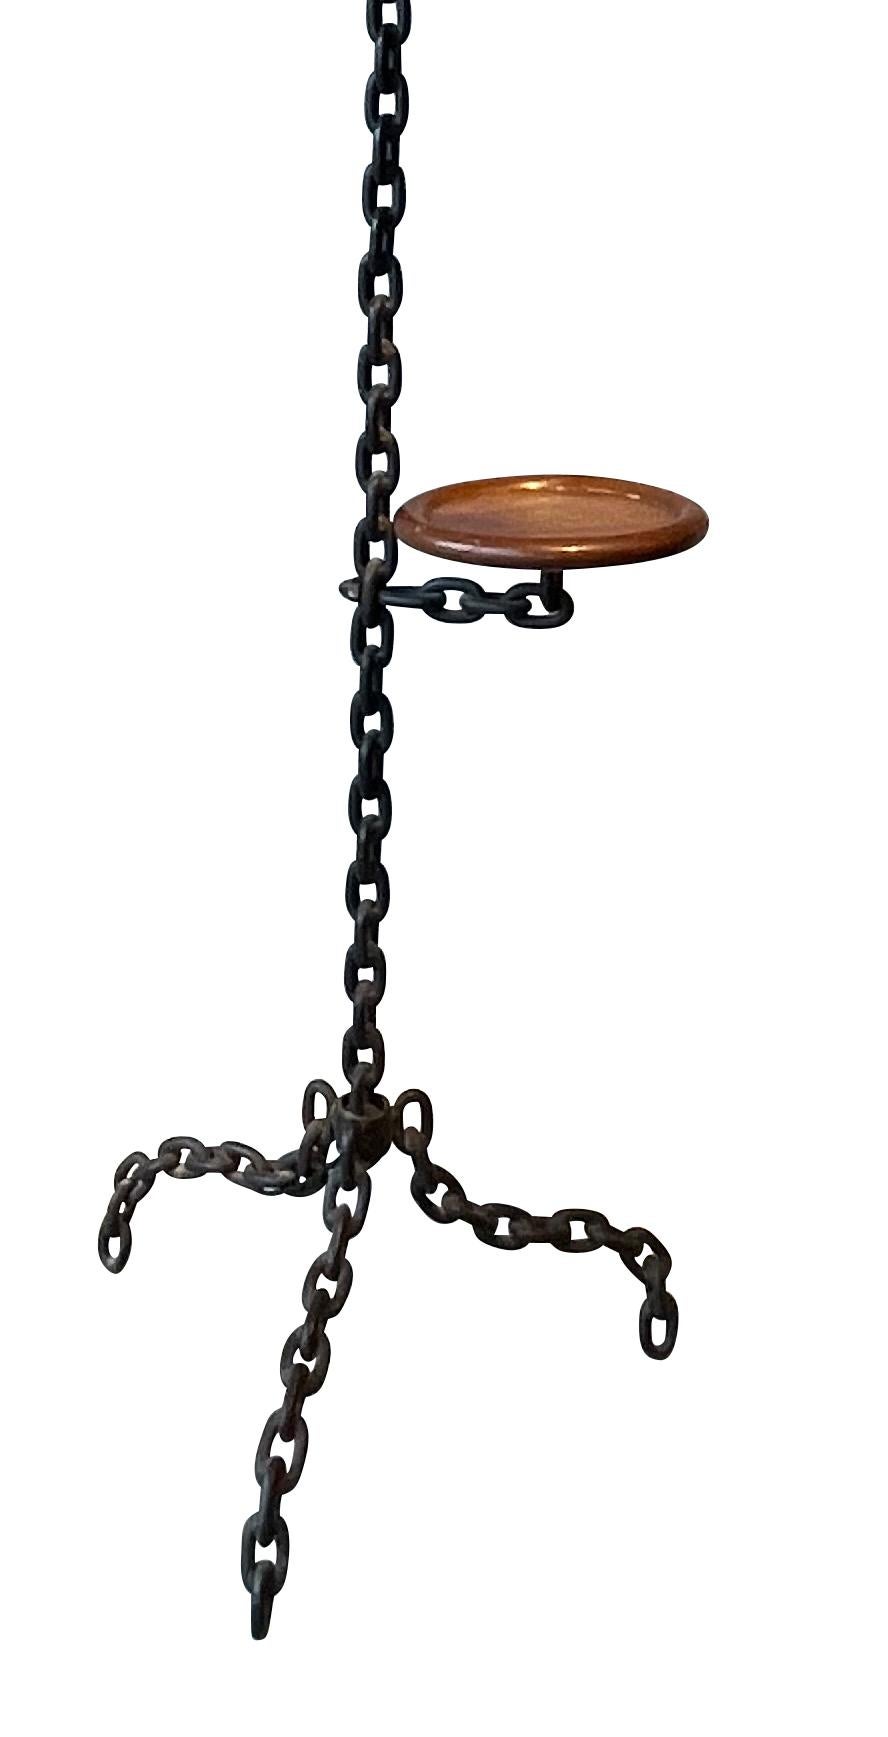 1940's French chain link floor lamp with attached drink table.
Drink table 9